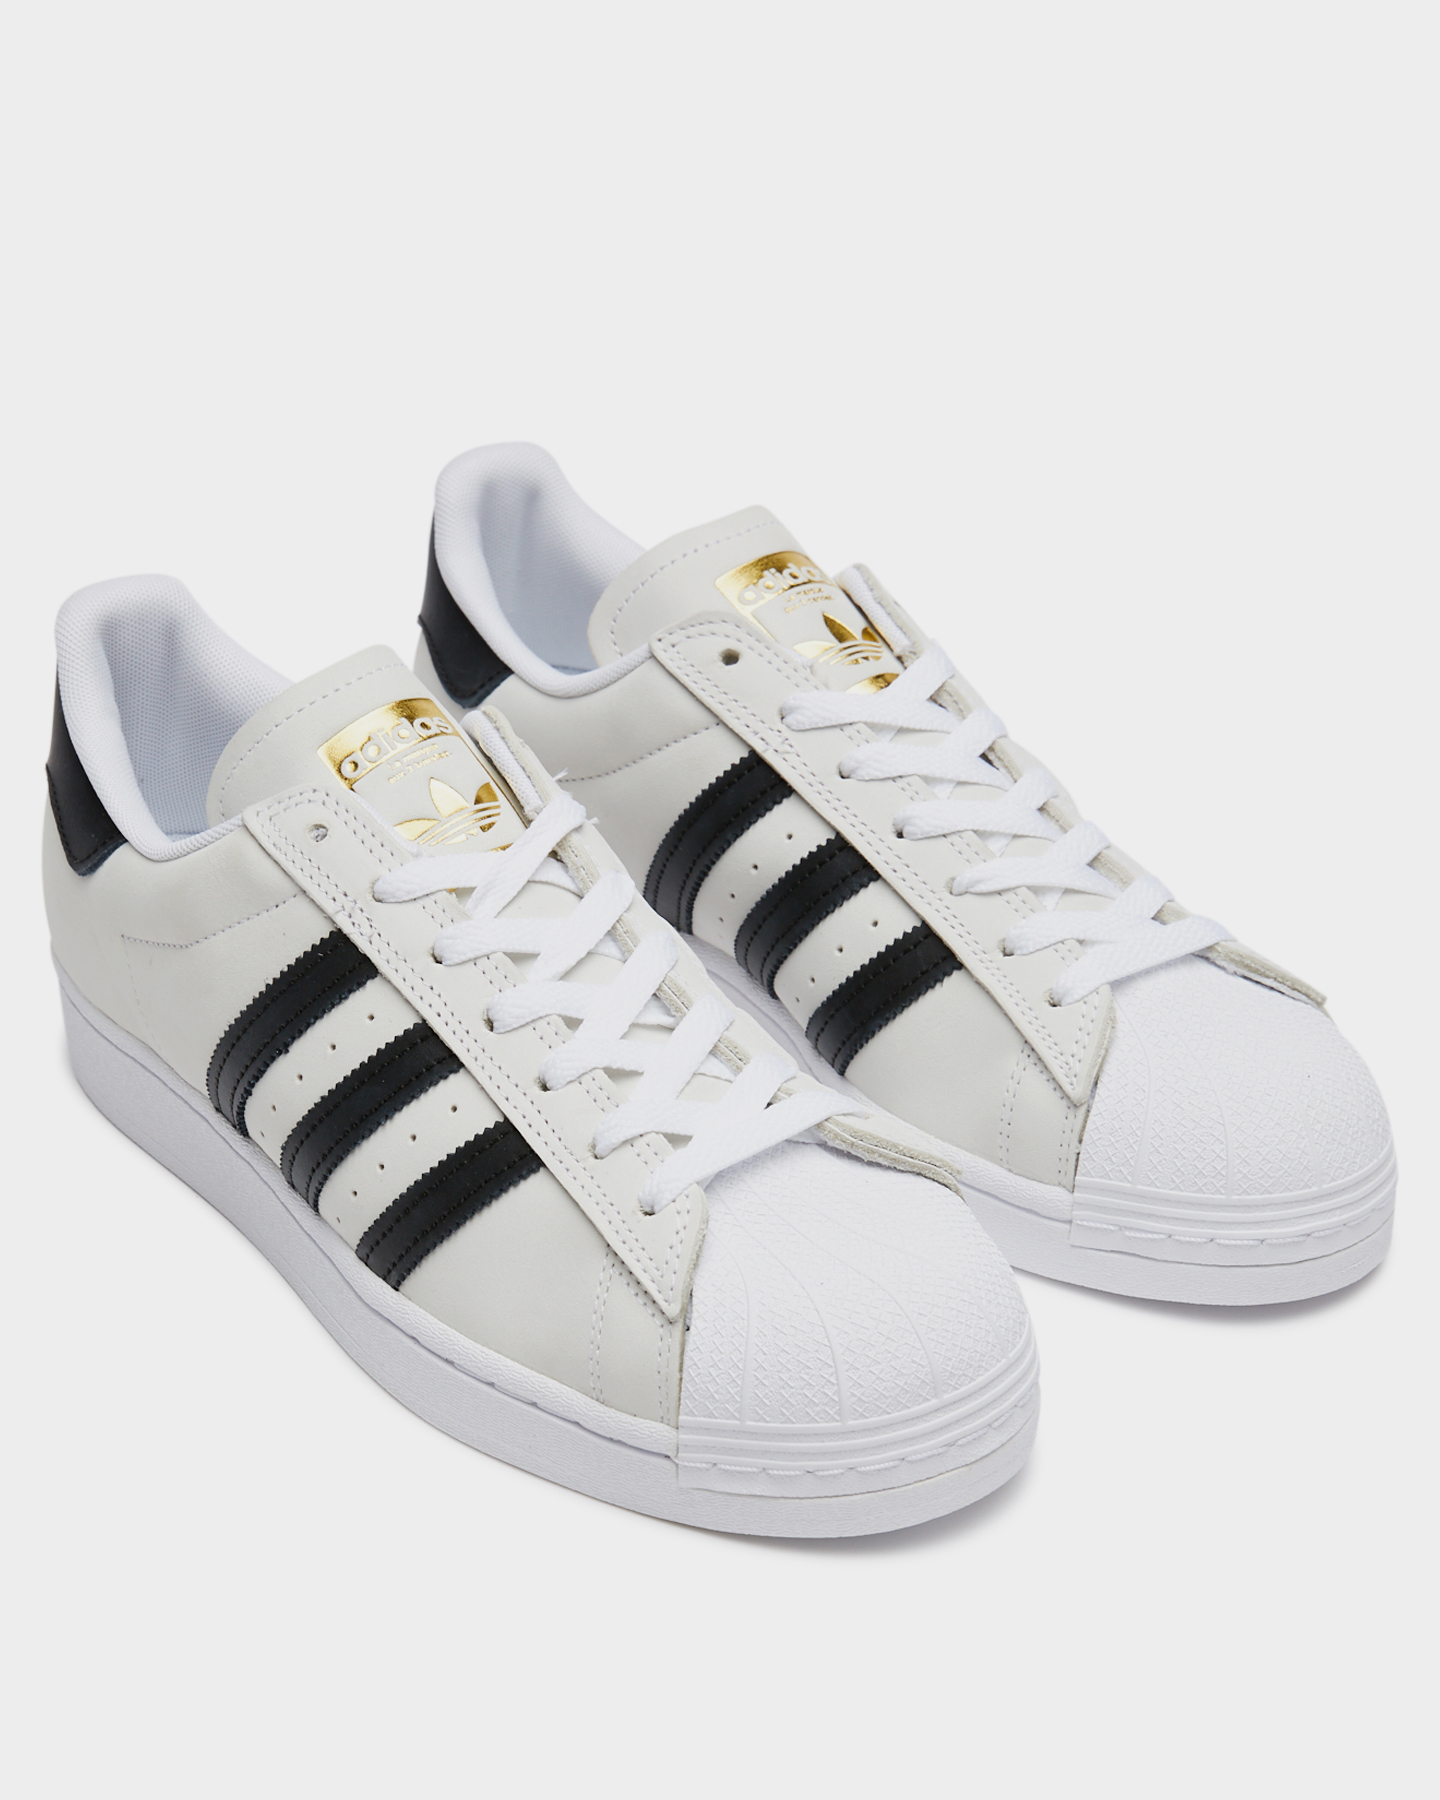 adidas sneakers melbourne